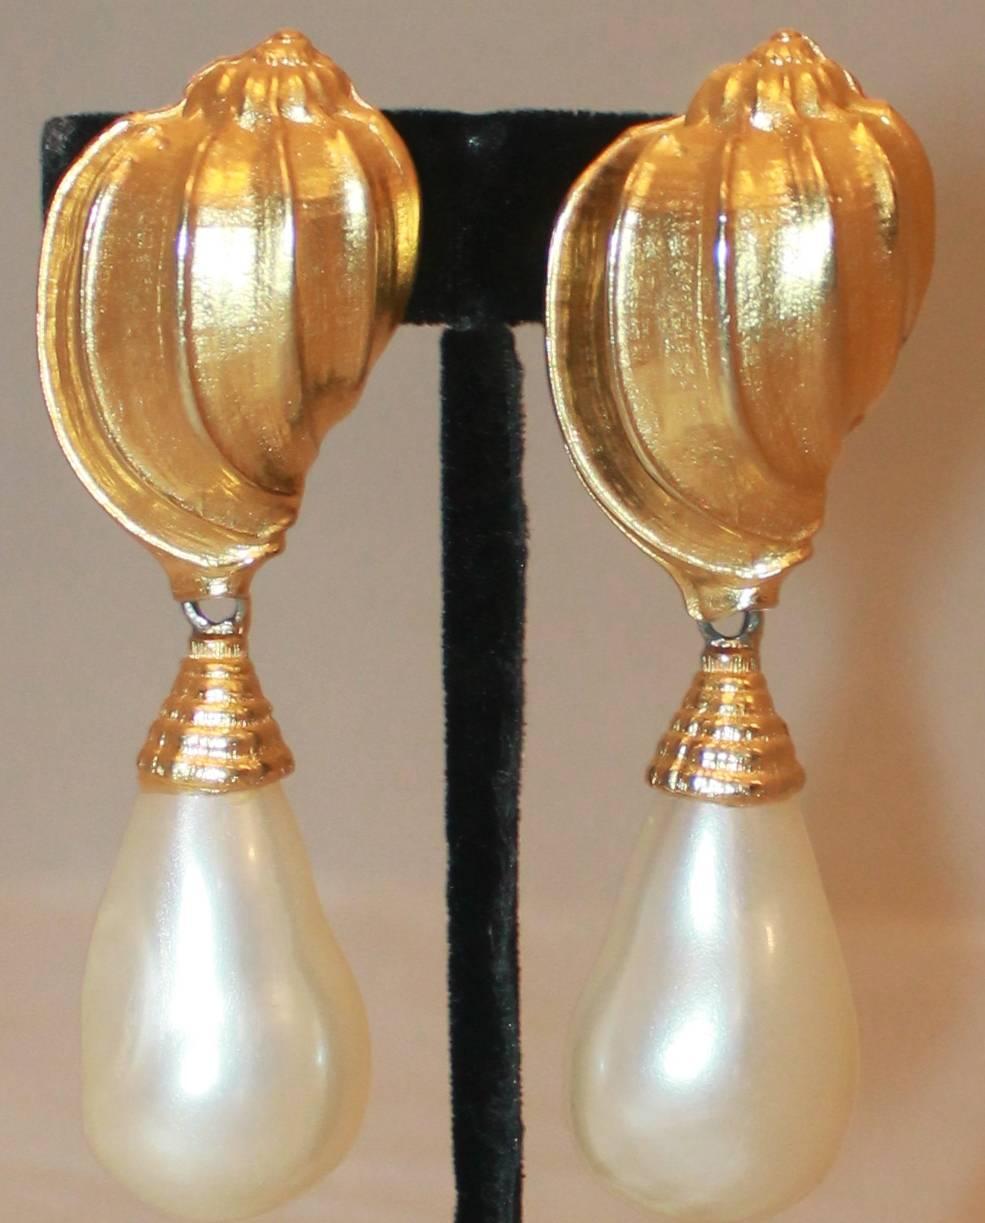 Ben Amun Gold Vintage Gold Seashell & Pearl Drop Earrings - circa 1980's. These clip-on earrings are in excellent vintage condition and have a gorgeous shape.

Length- 3.5